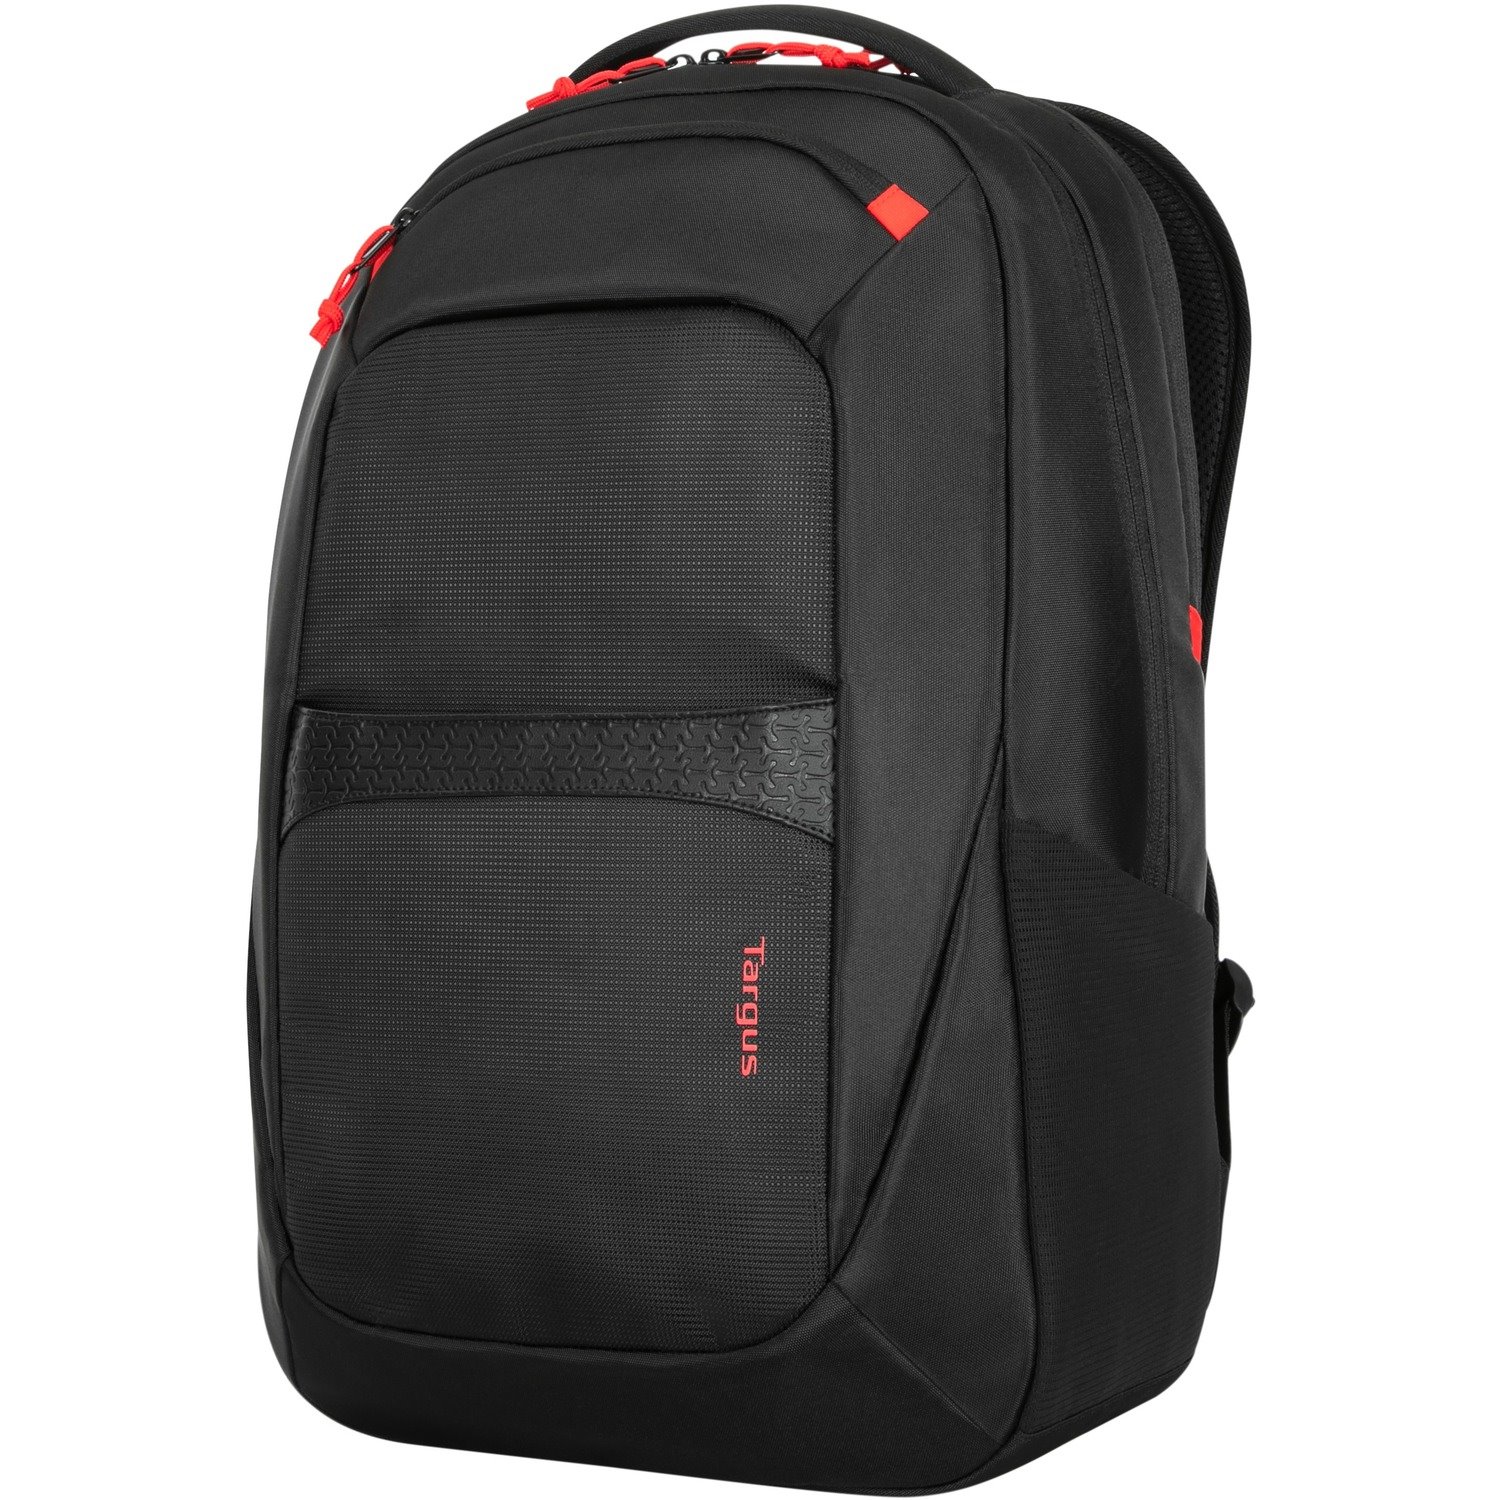 Targus Carrying Case (Backpack) for 17.3" Notebook